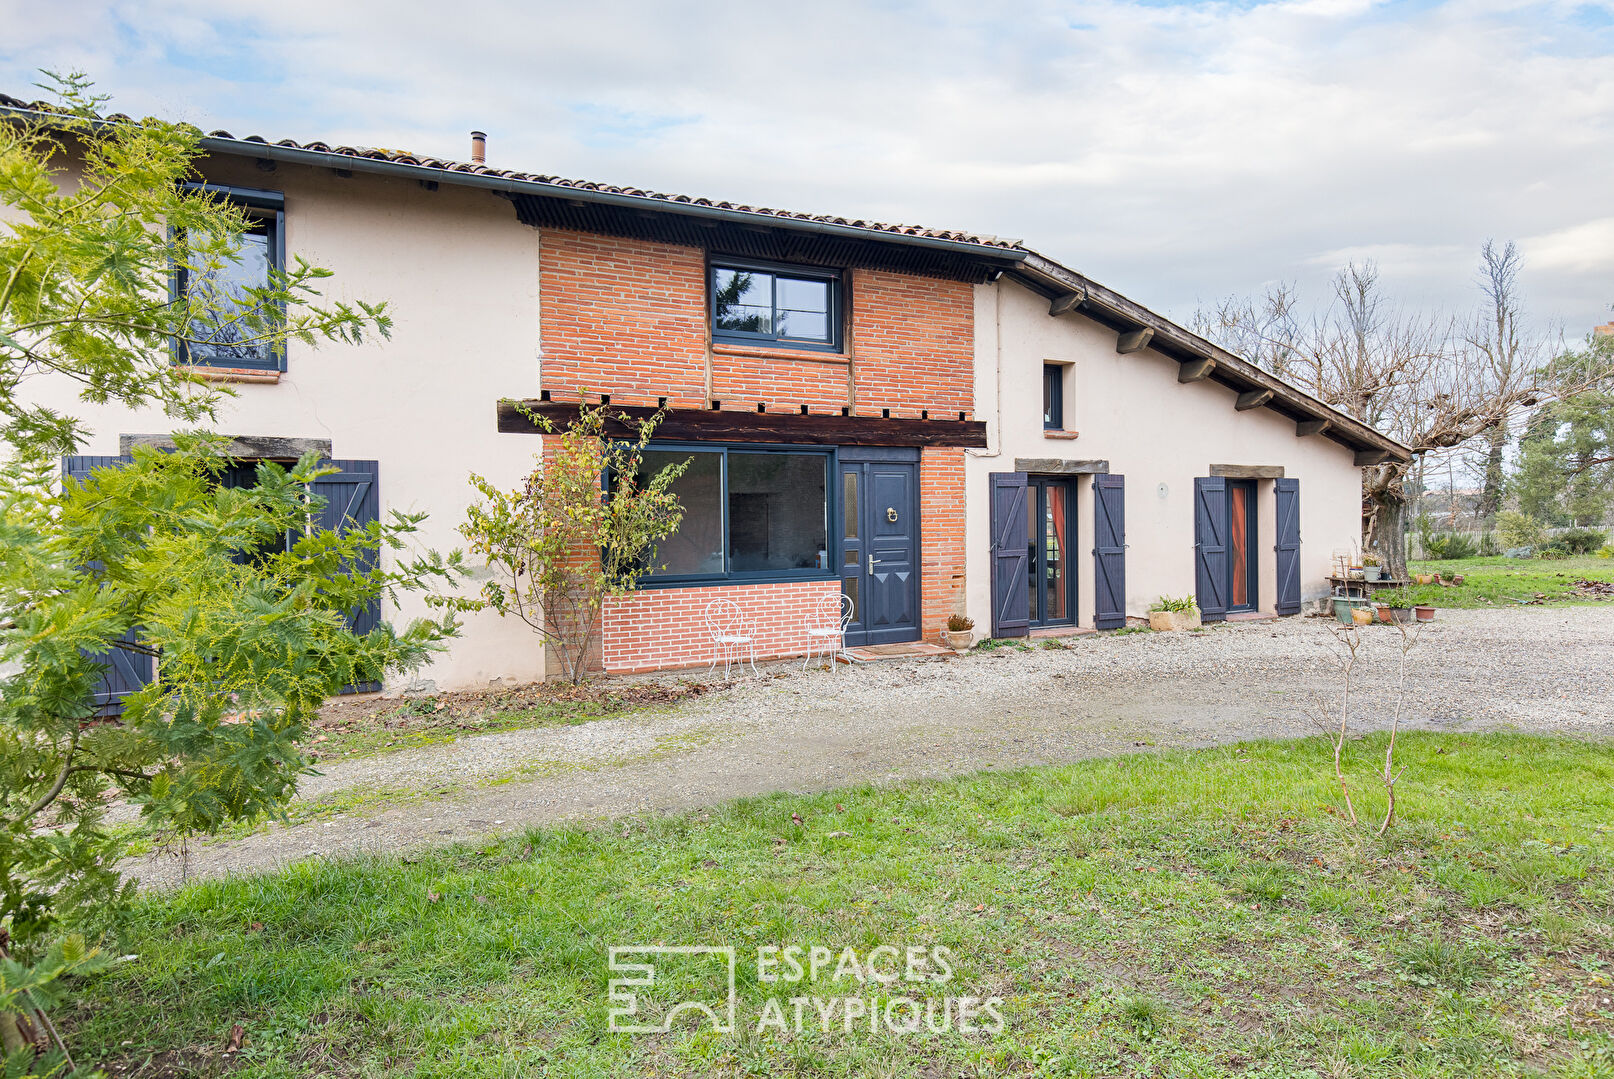 Tastefully renovated farmhouse a few minutes from the city center